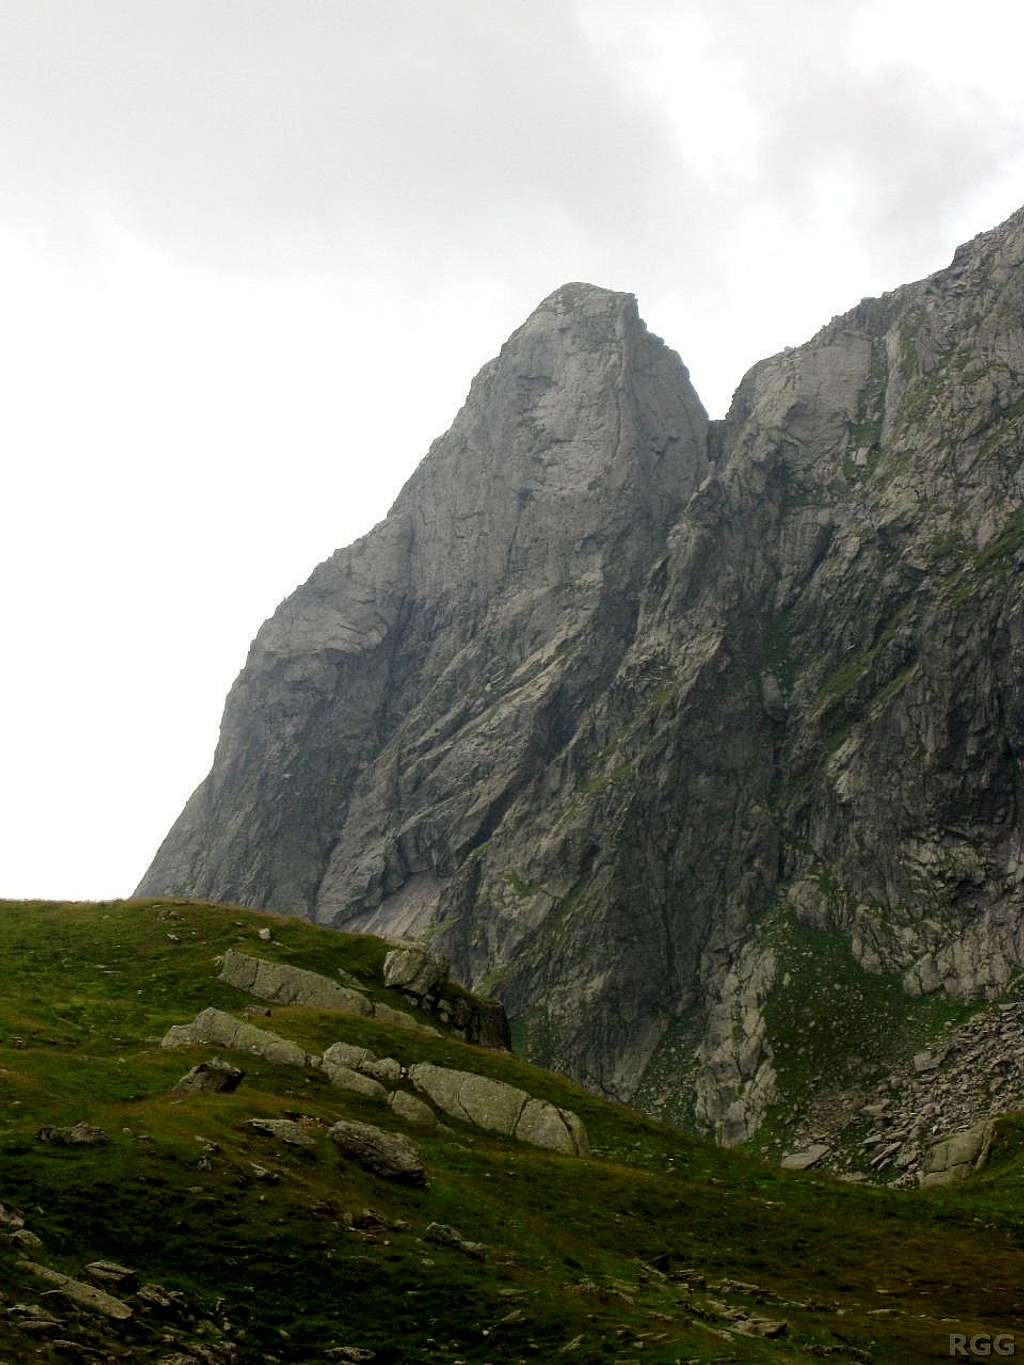 A tower on the ridge east of the Zielspitze